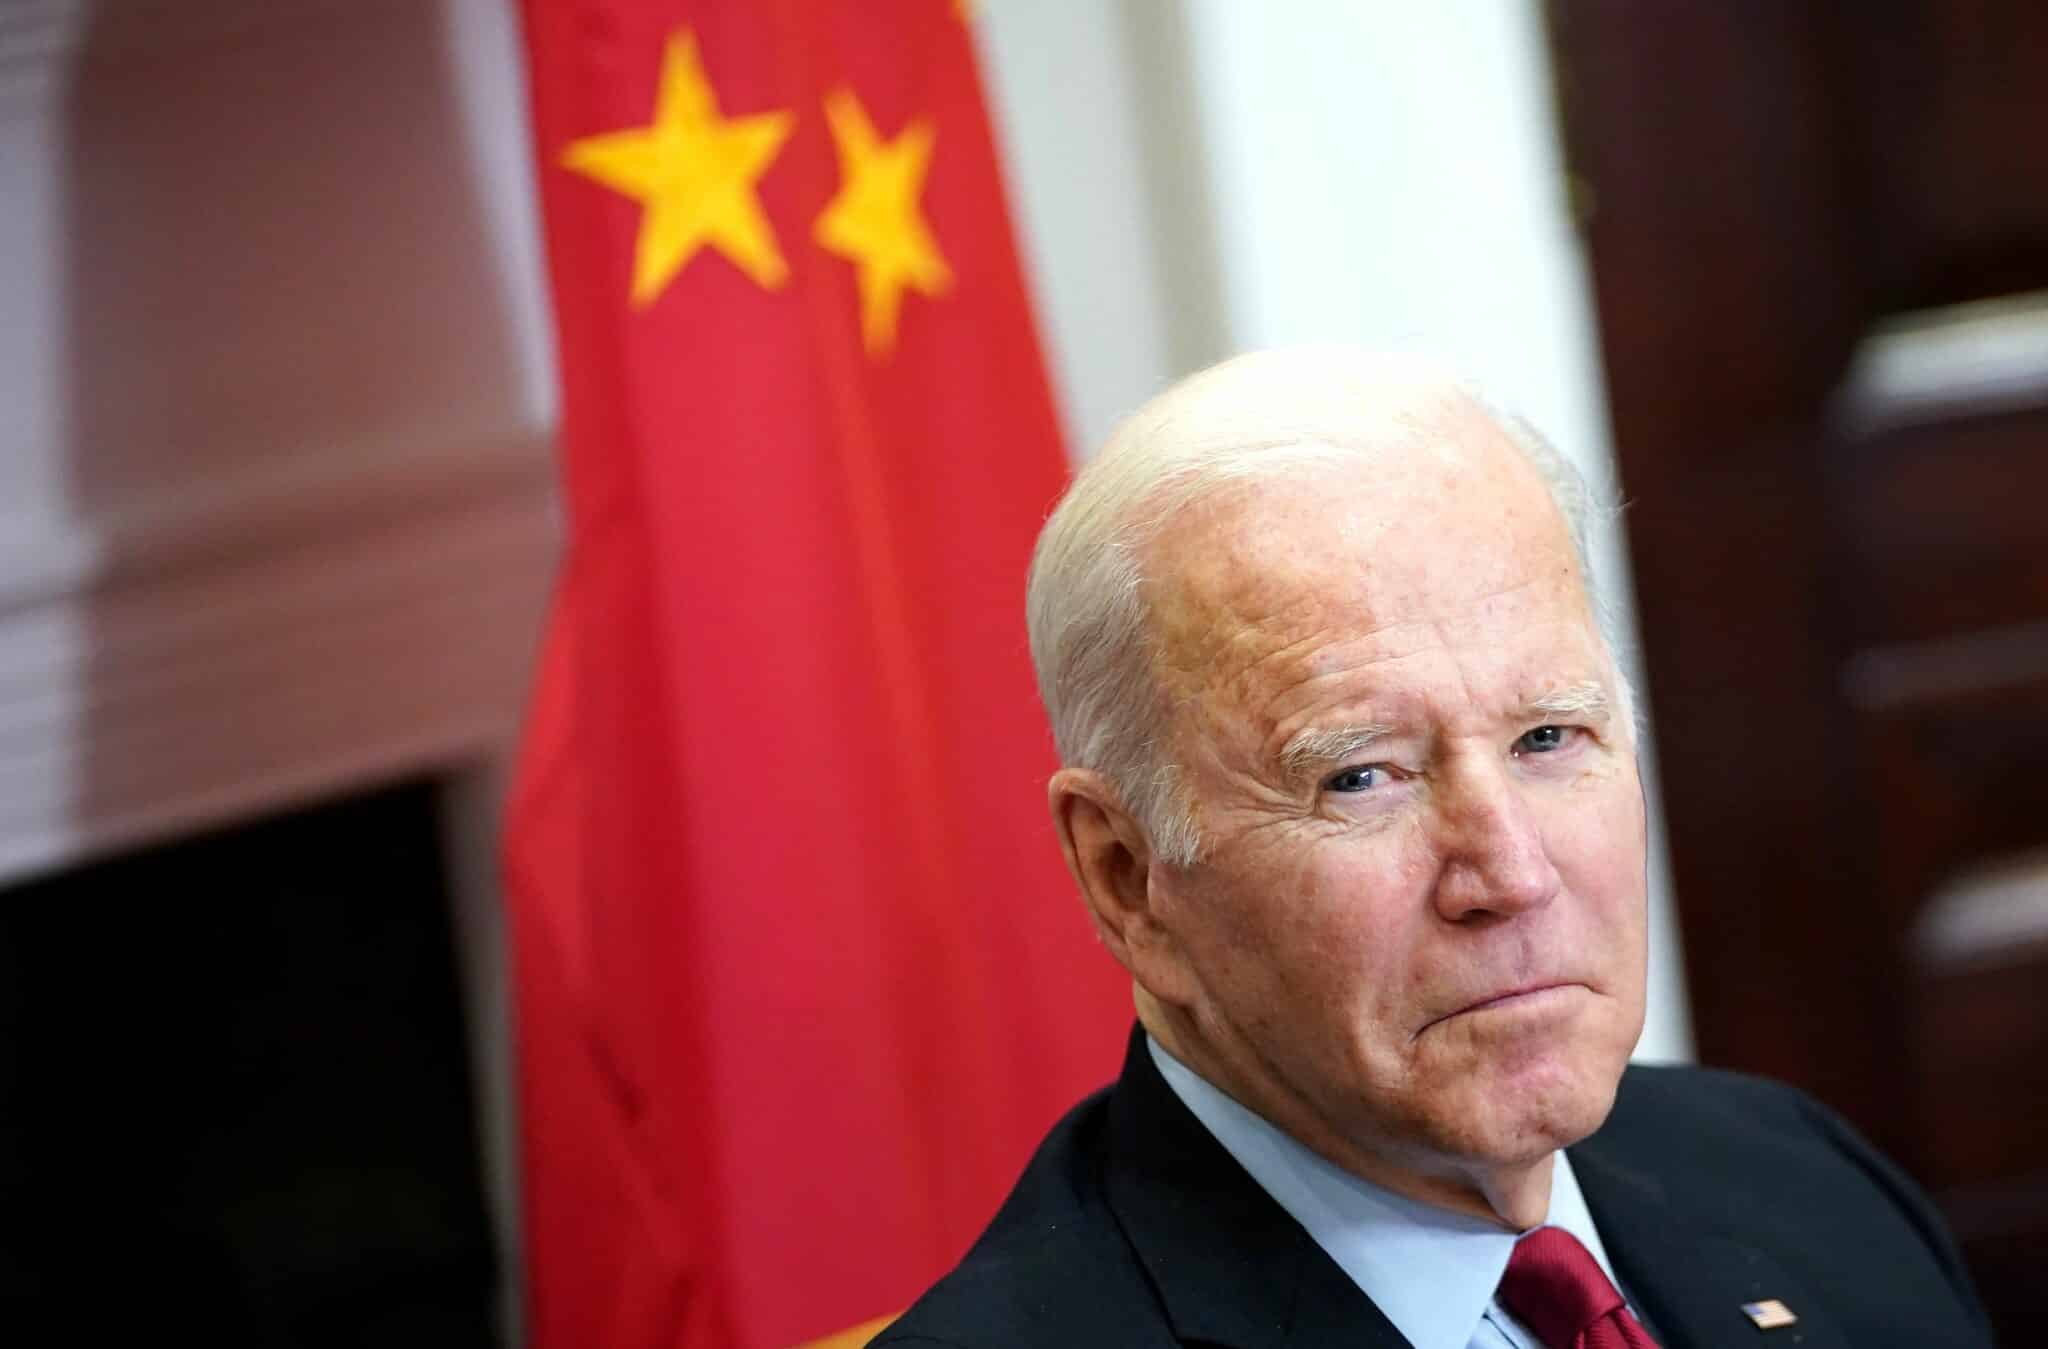 US President Joe Biden meets with China's President Xi Jinping during a virtual summit from the Roosevelt Room of the White House in Washington, DC, November 15, 2021. (Photo by MANDEL NGAN / AFP) (Photo by MANDEL NGAN/AFP via Getty Images)